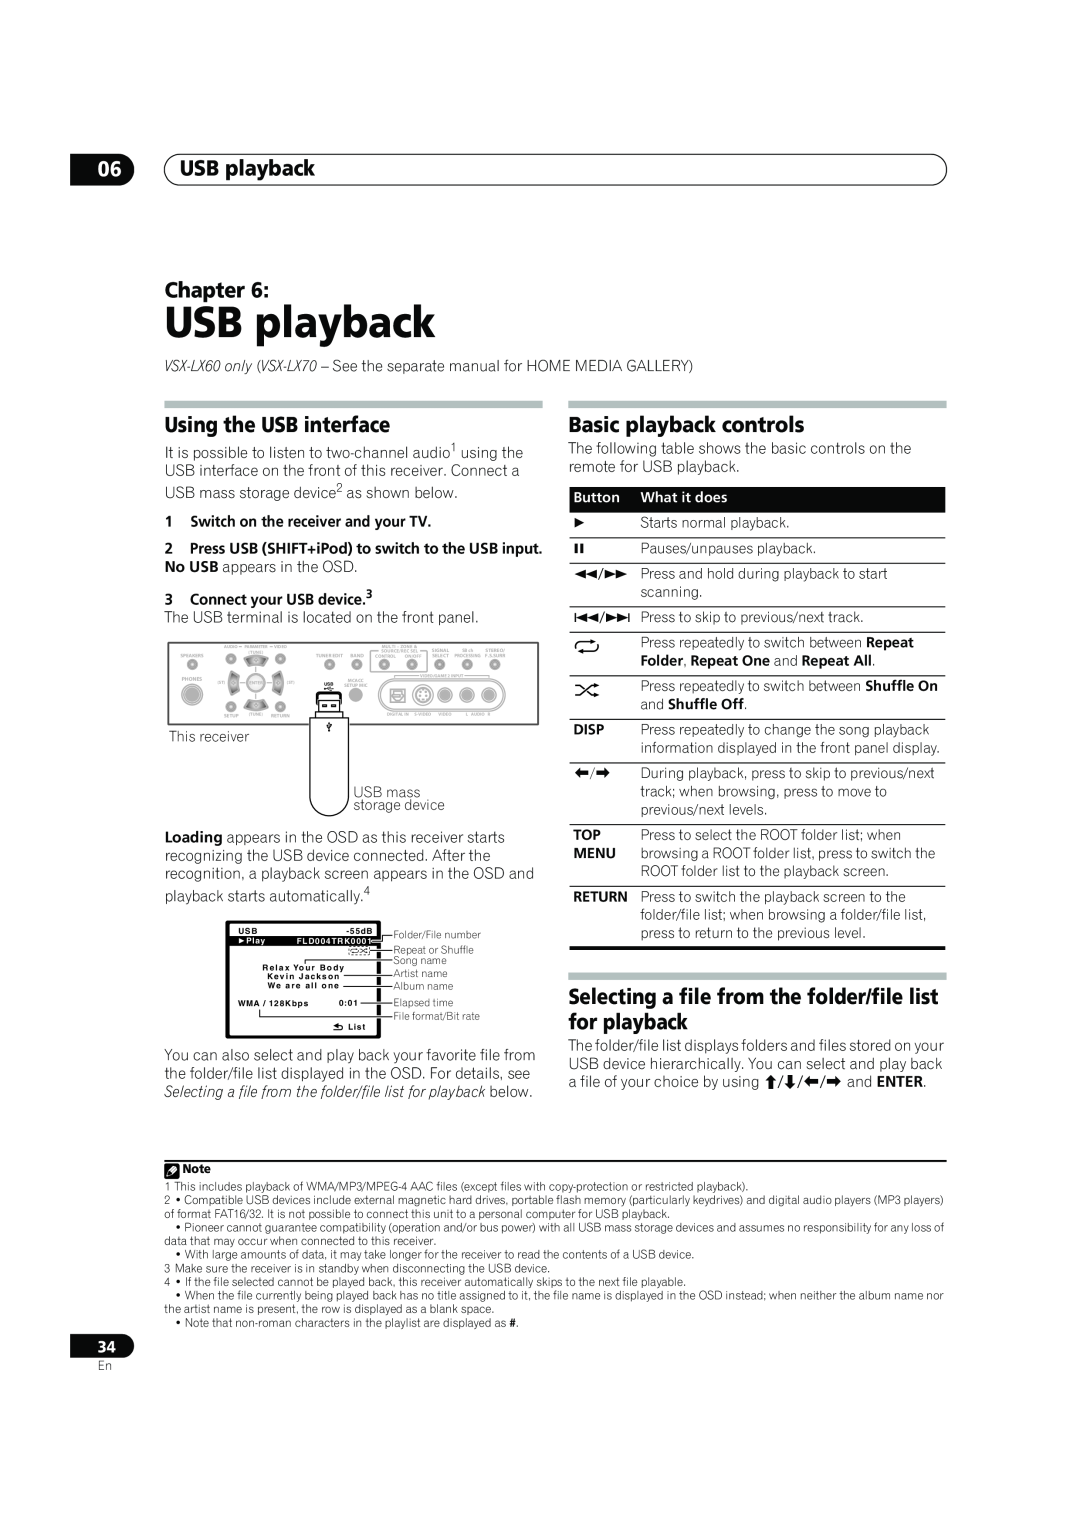 Pioneer VSX-LX60 06USB playback Chapter, Using the USB interface, Basic playback controls, Button What it does 